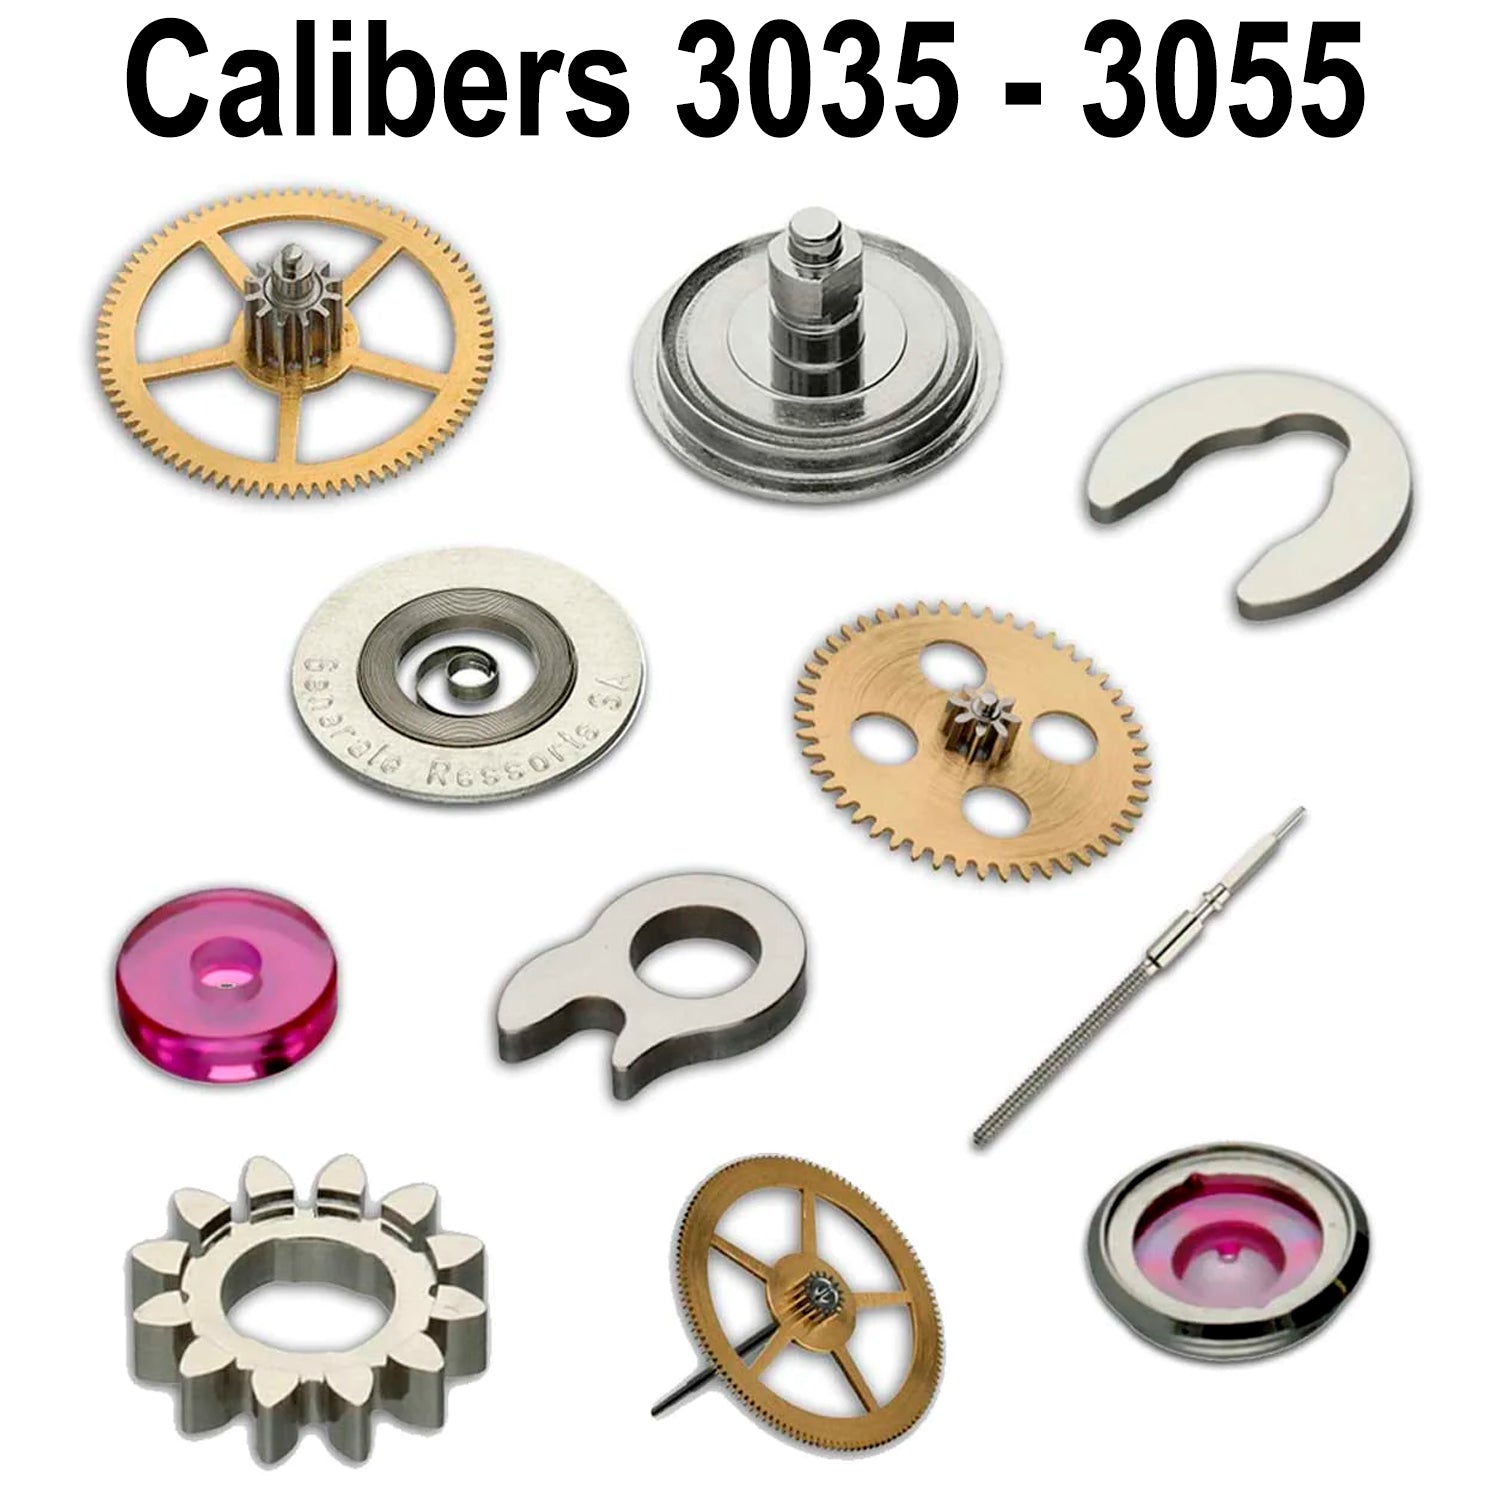 Internal Parts to fit Rolex 30 Series Calibers 3035 - 3055